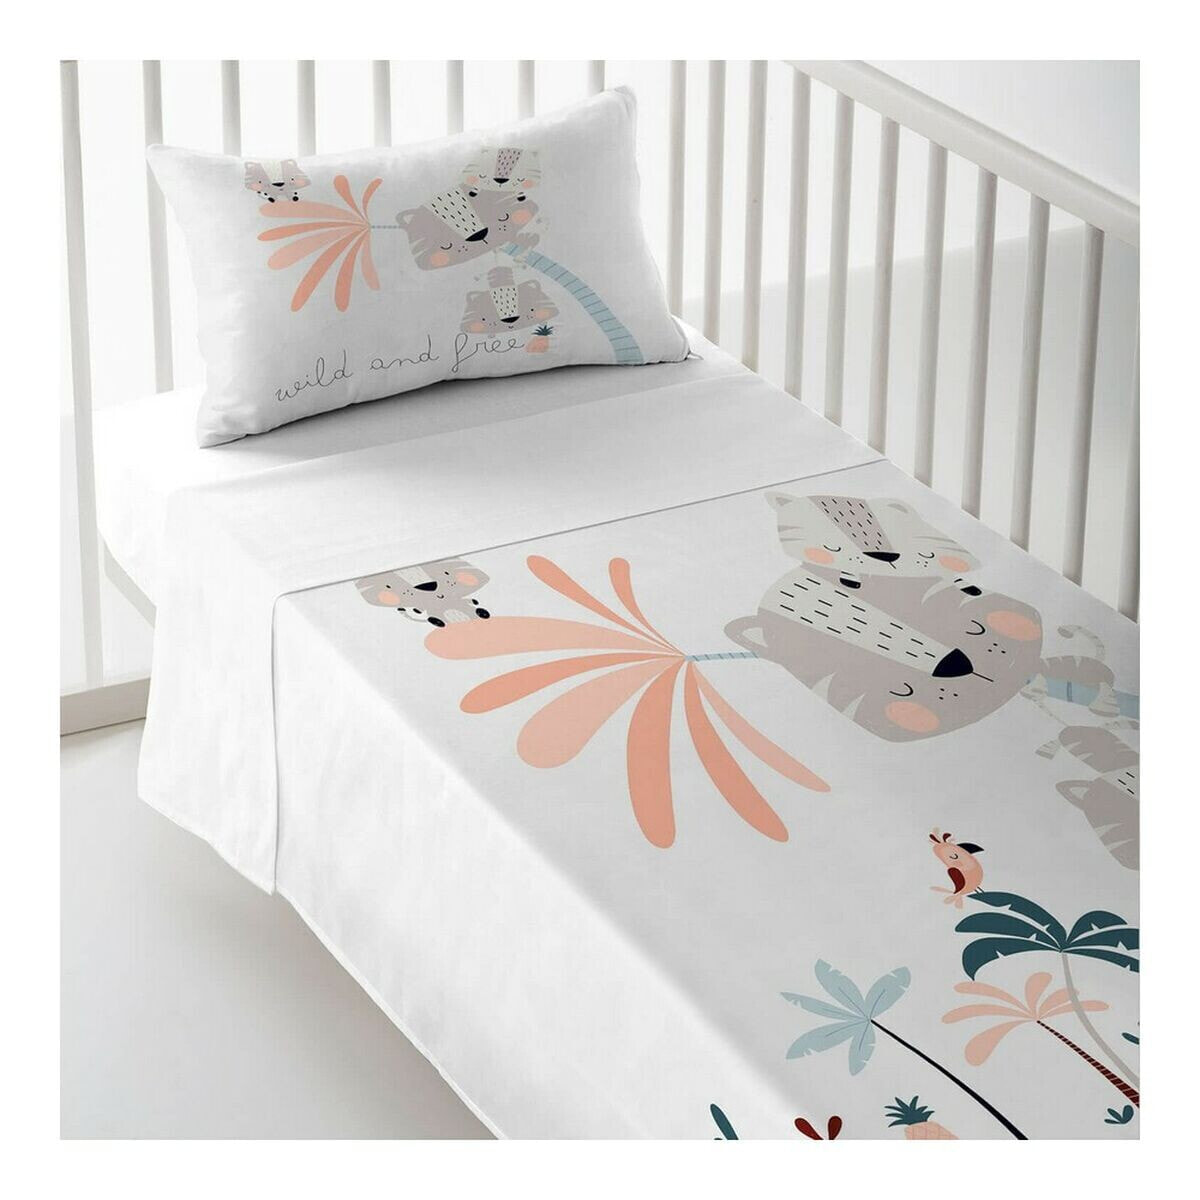 Cot Flat Sheet Cool Kids Wild And Free A 120 x 180 cm